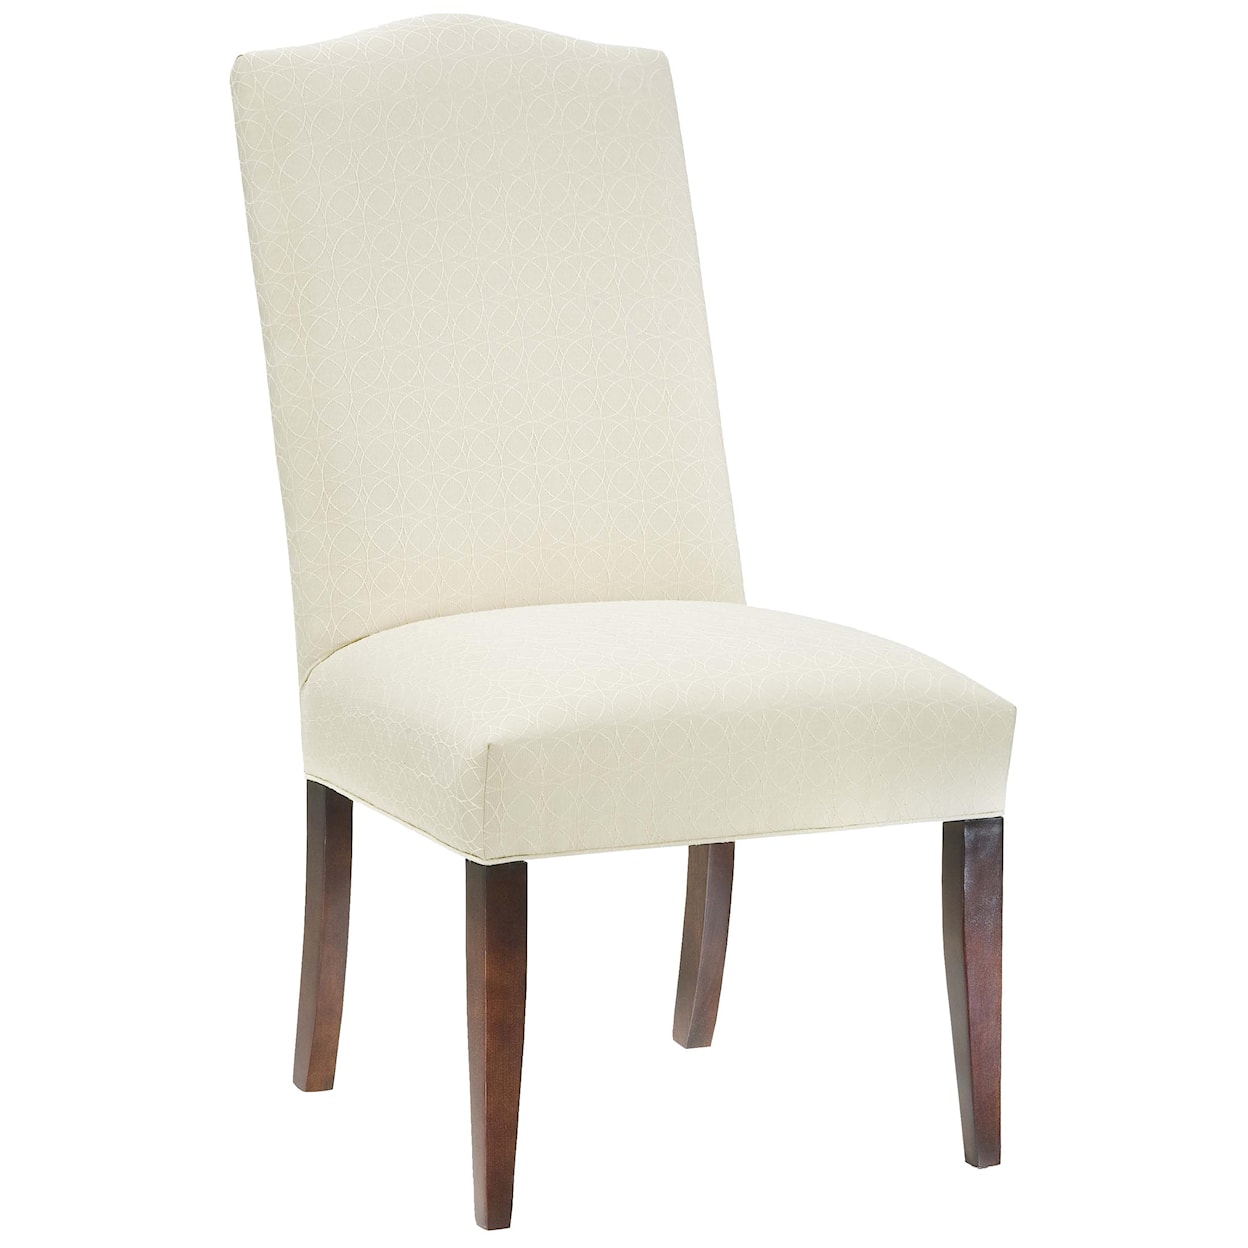 Fairfield Chairs Upholstered Side Chair